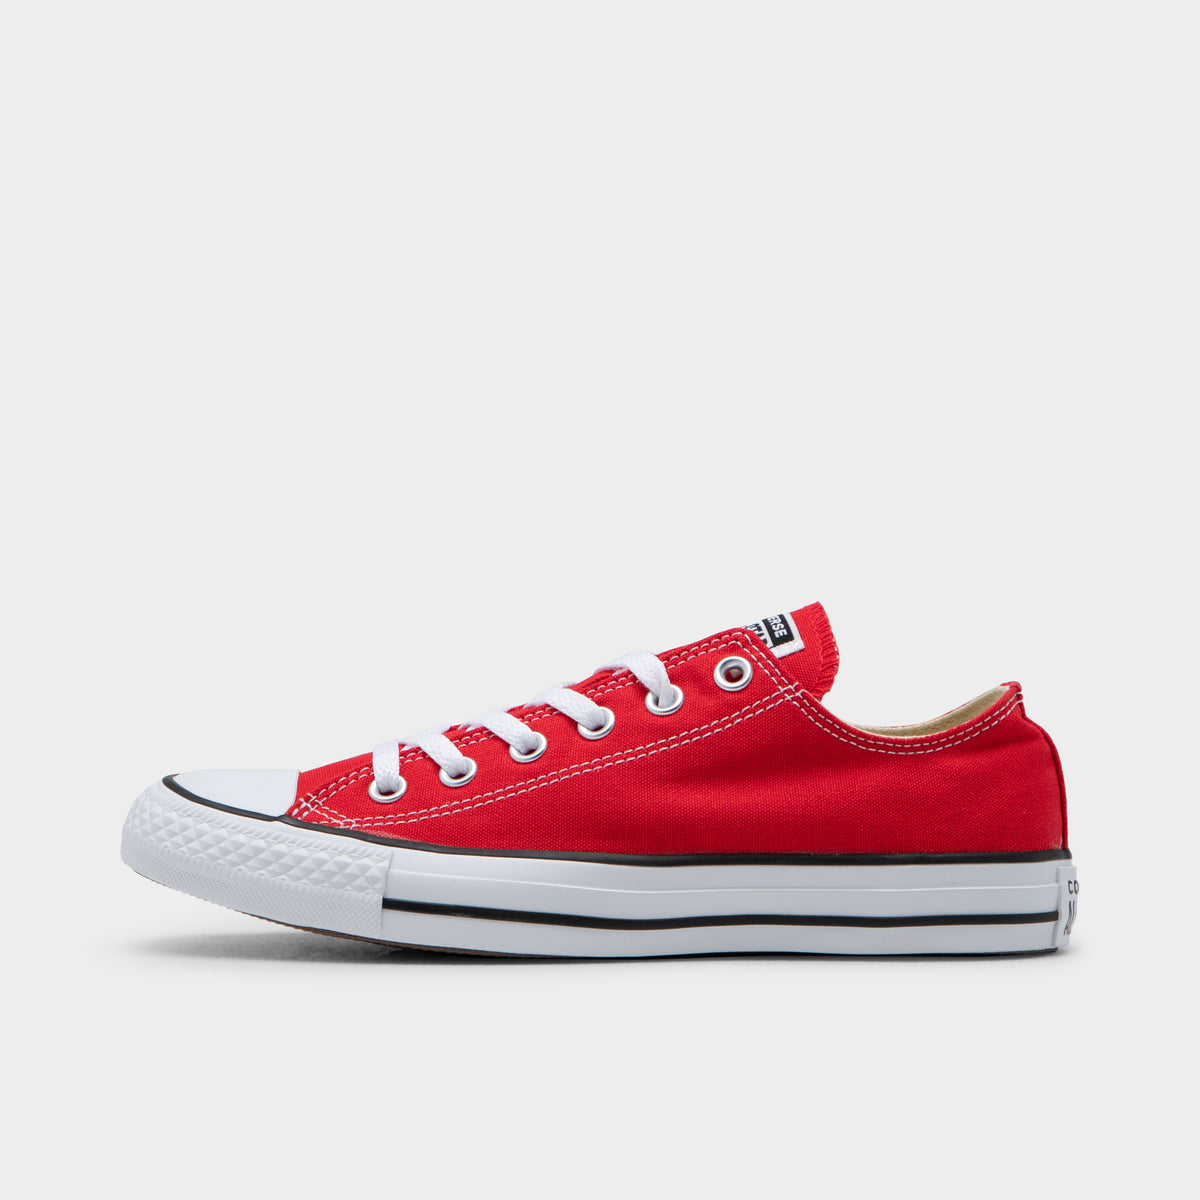 Converse Chuck Taylor All Star / Red